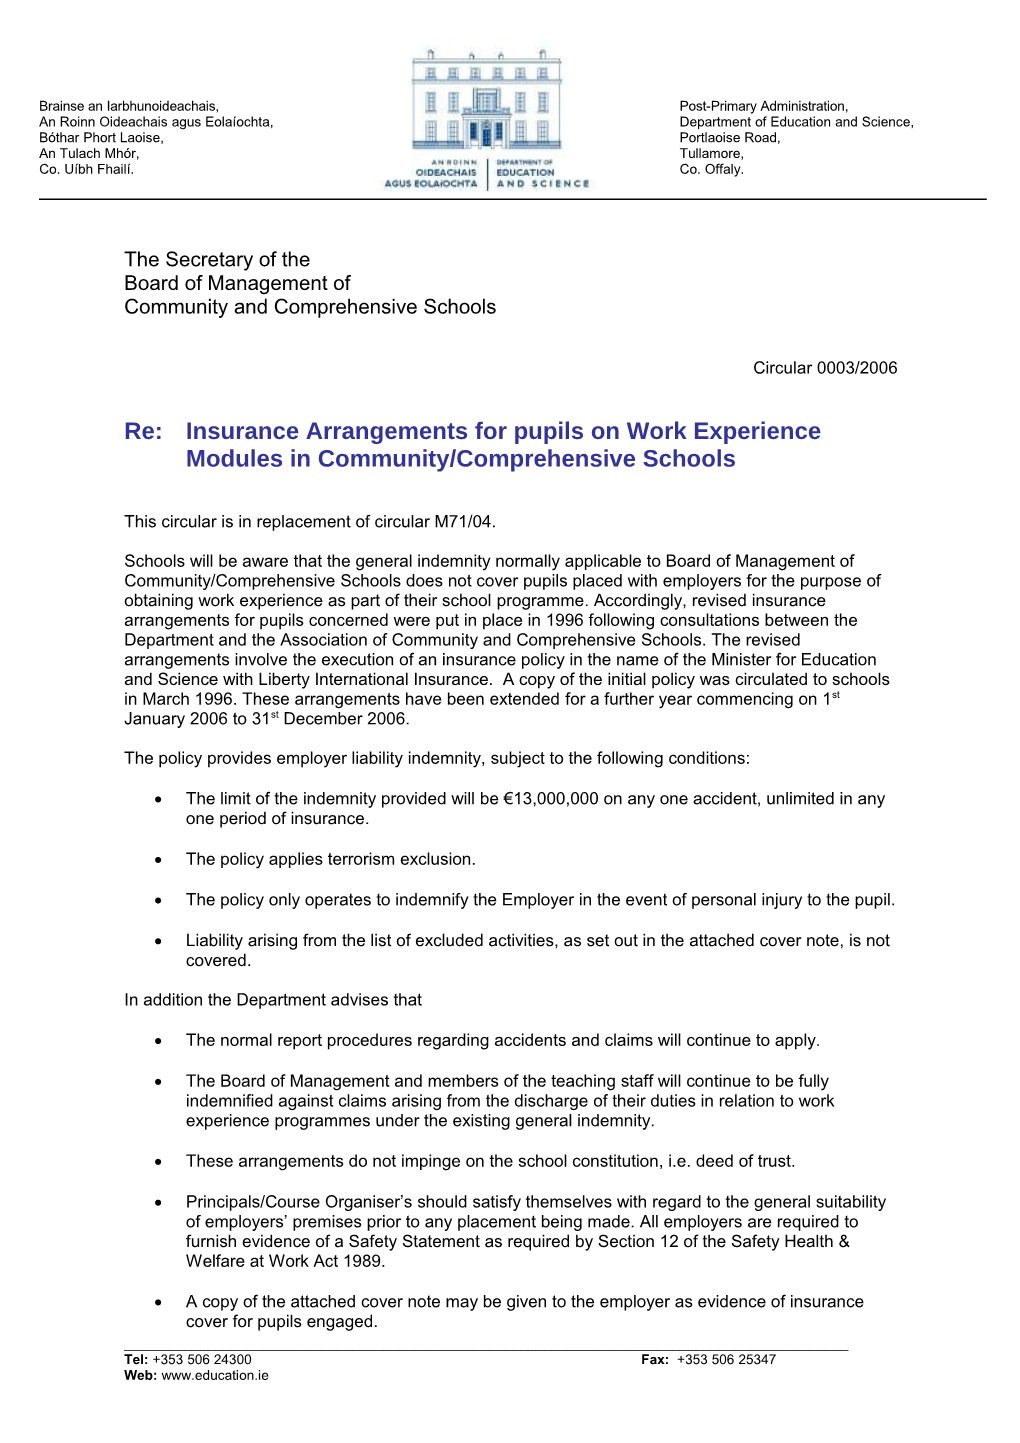 Circular 0003/2006 - Insurance Arrangements for Pupils on Work Experience Modules In